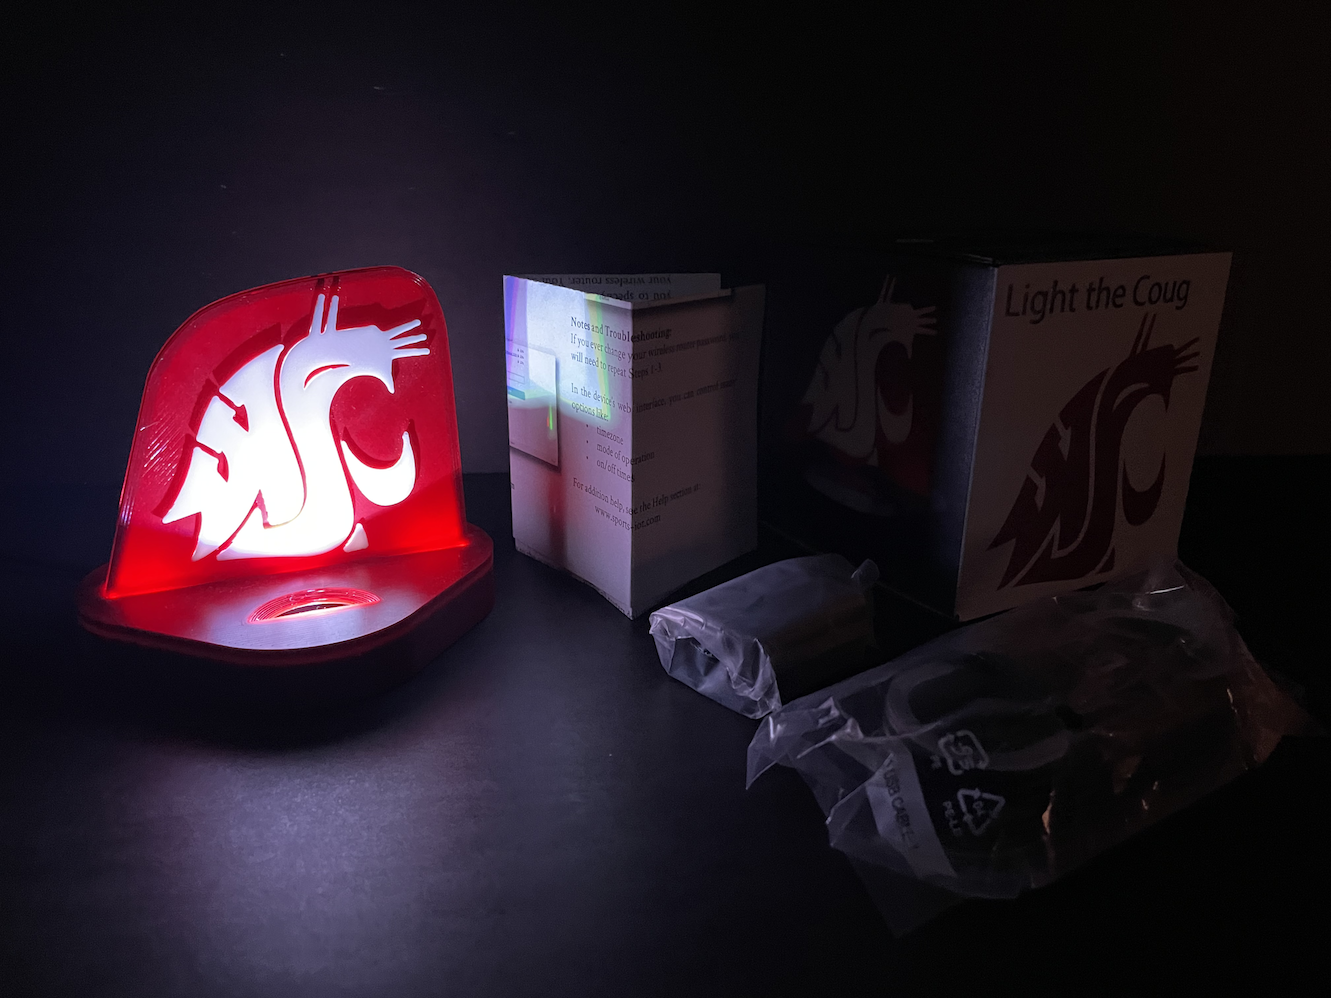 4-inch Internet-connected WSU Coug